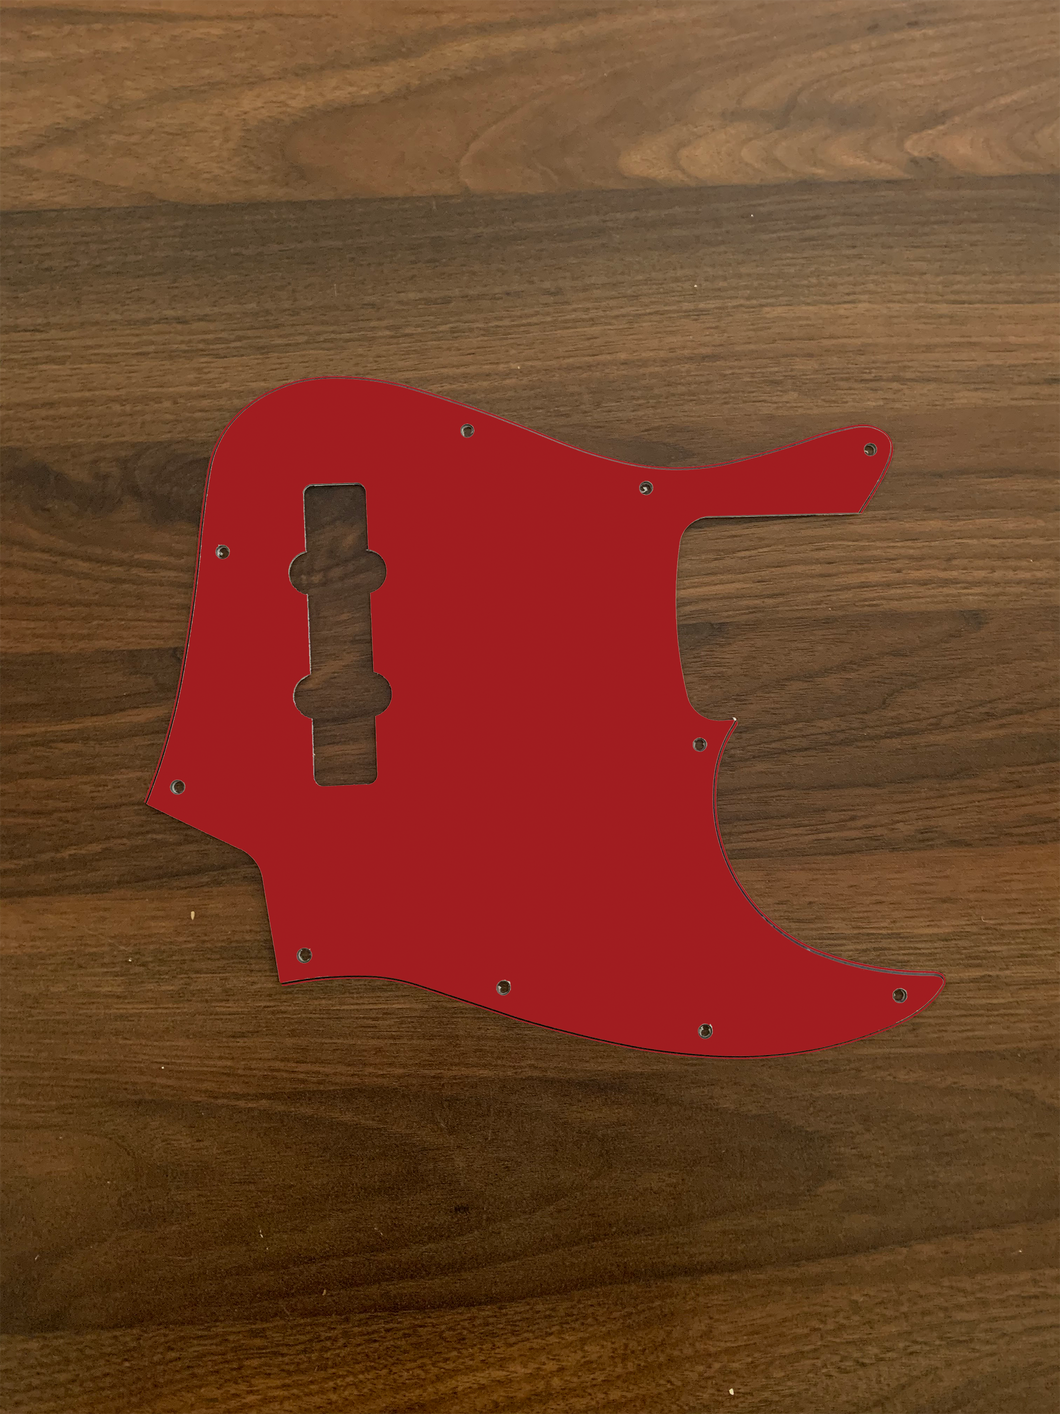 Candy Apple Red-Solid Jazz Bass Pickguard by Carmedon